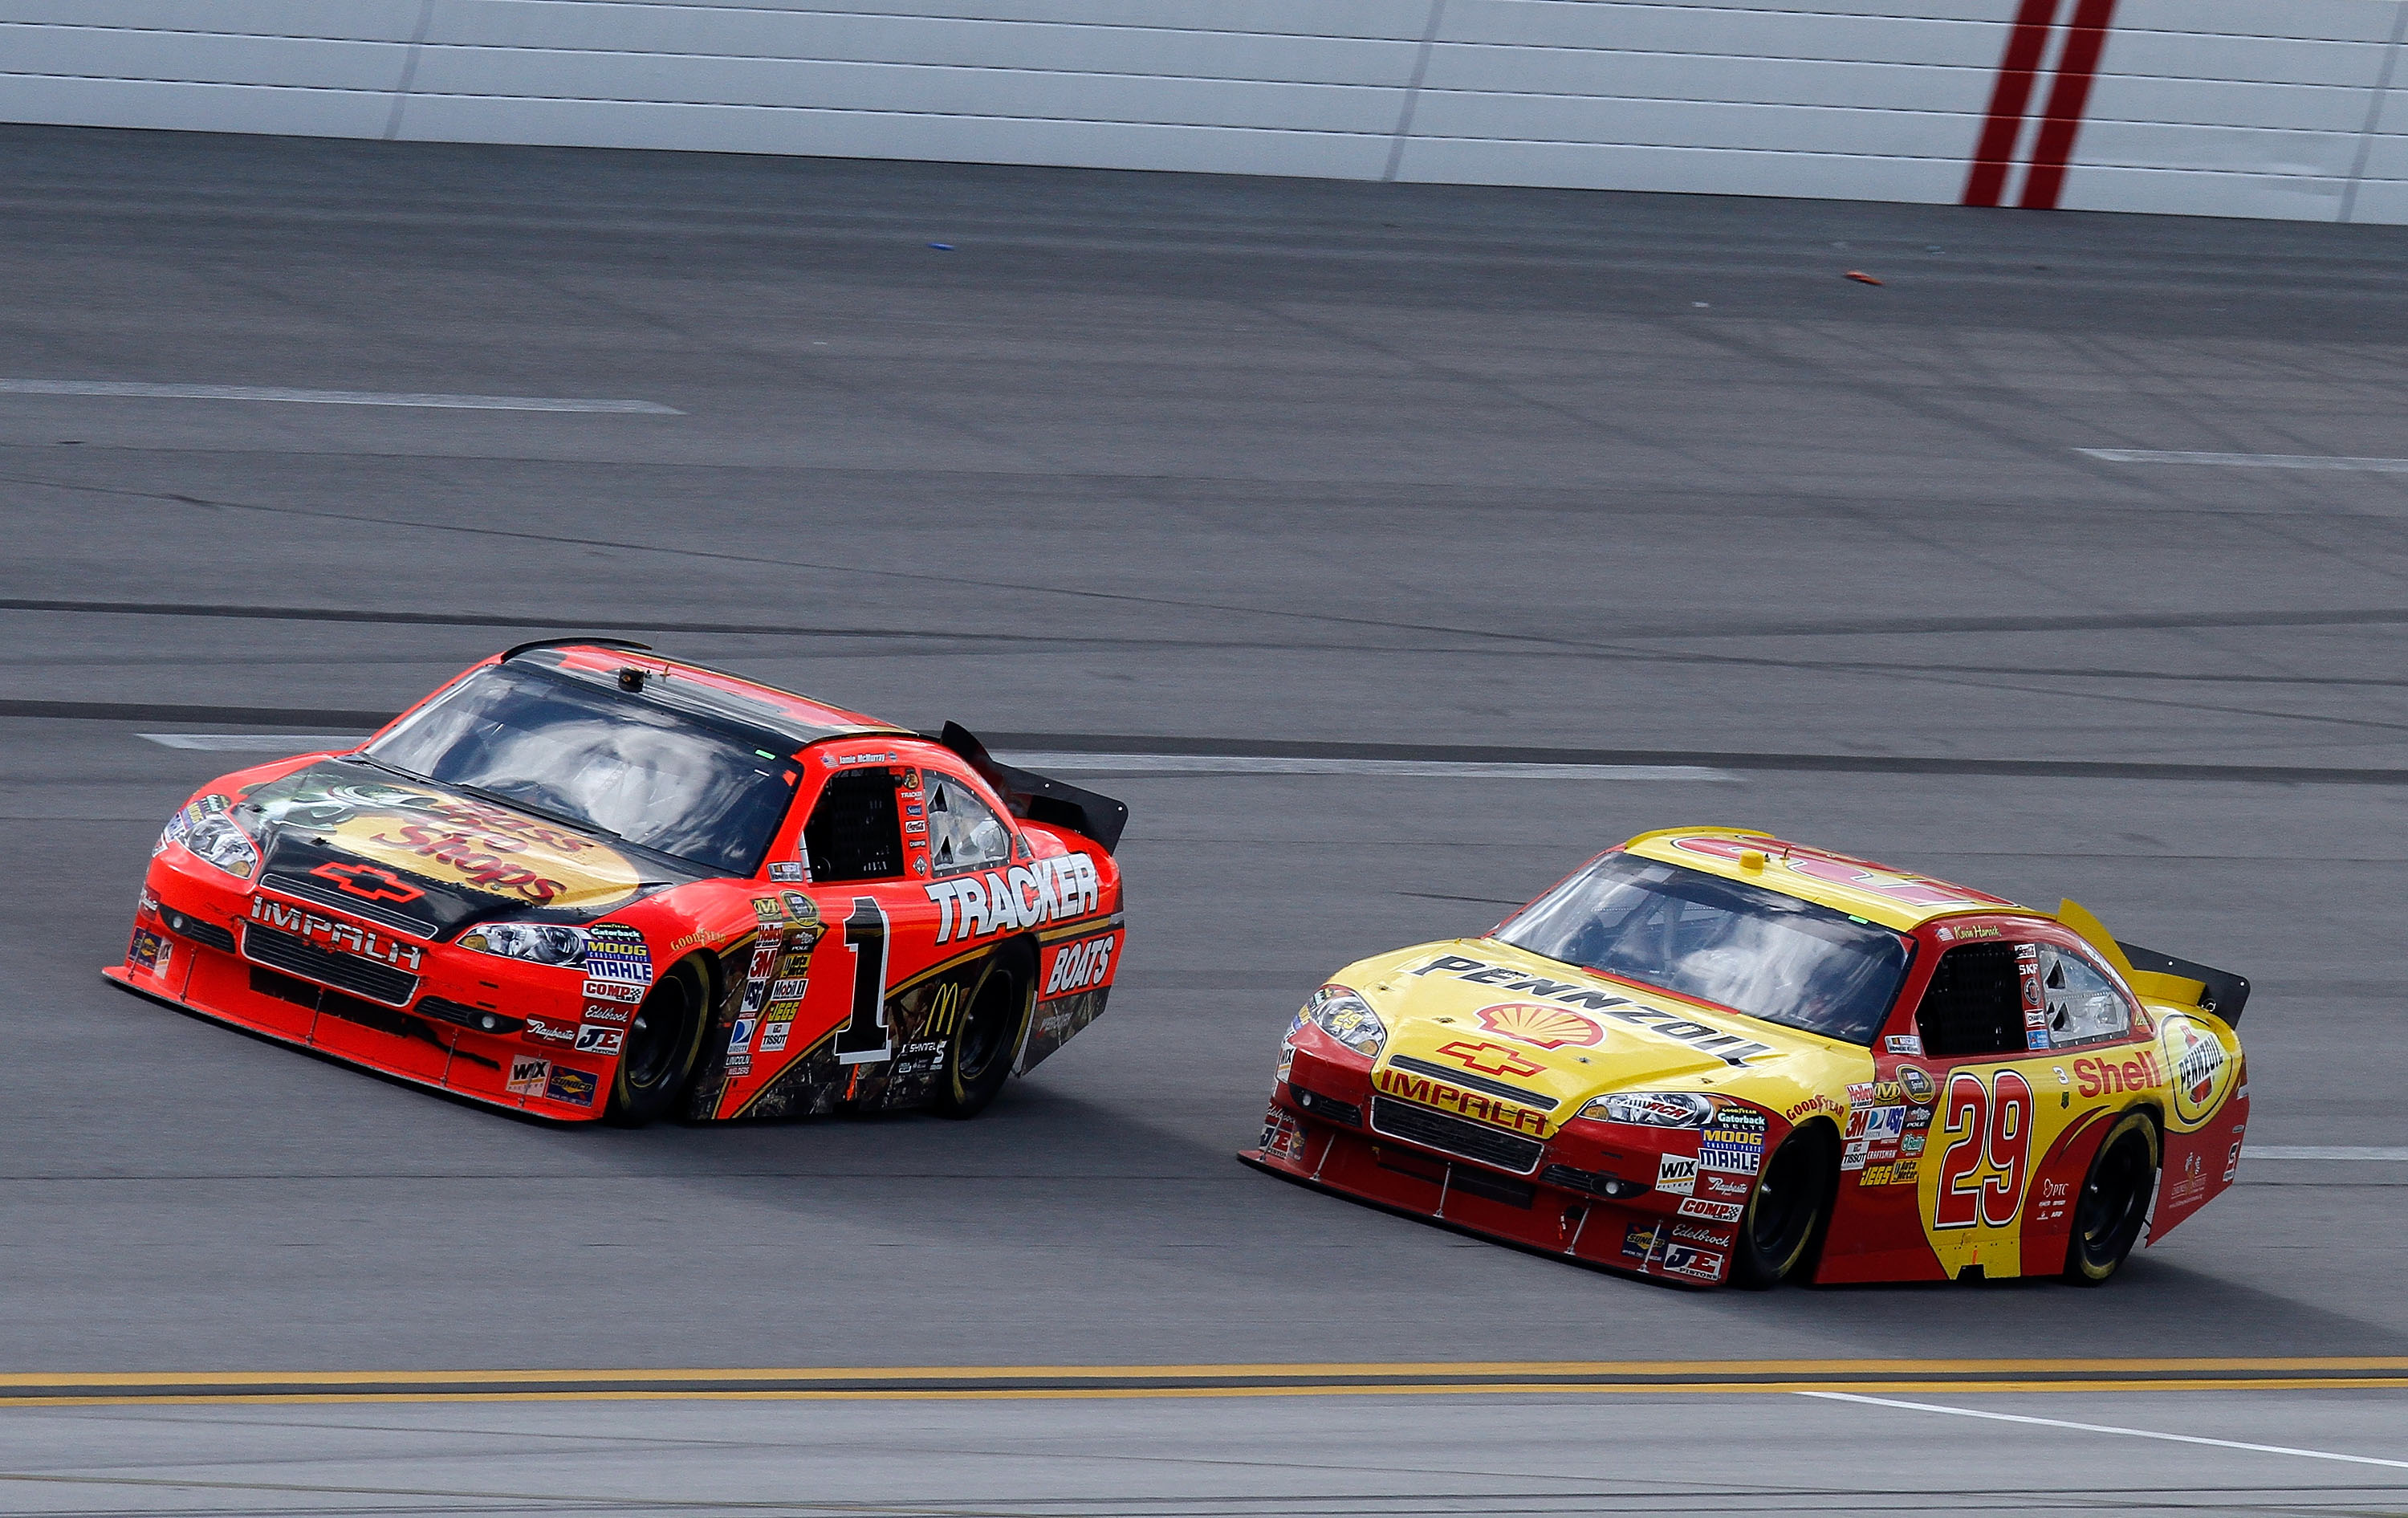 TALLADEGA, AL - APRIL 25:  Kevin Harvick, driver of the #29 Shell/Pennzoil Chevrolet, races Jamie McMurray, driver of the #1 Bass Pro Shops Chevrolet, to the finish of the NASCAR Sprint Cup Series Aaron's 499 at Talladega Superspeedway on April 25, 2010 i